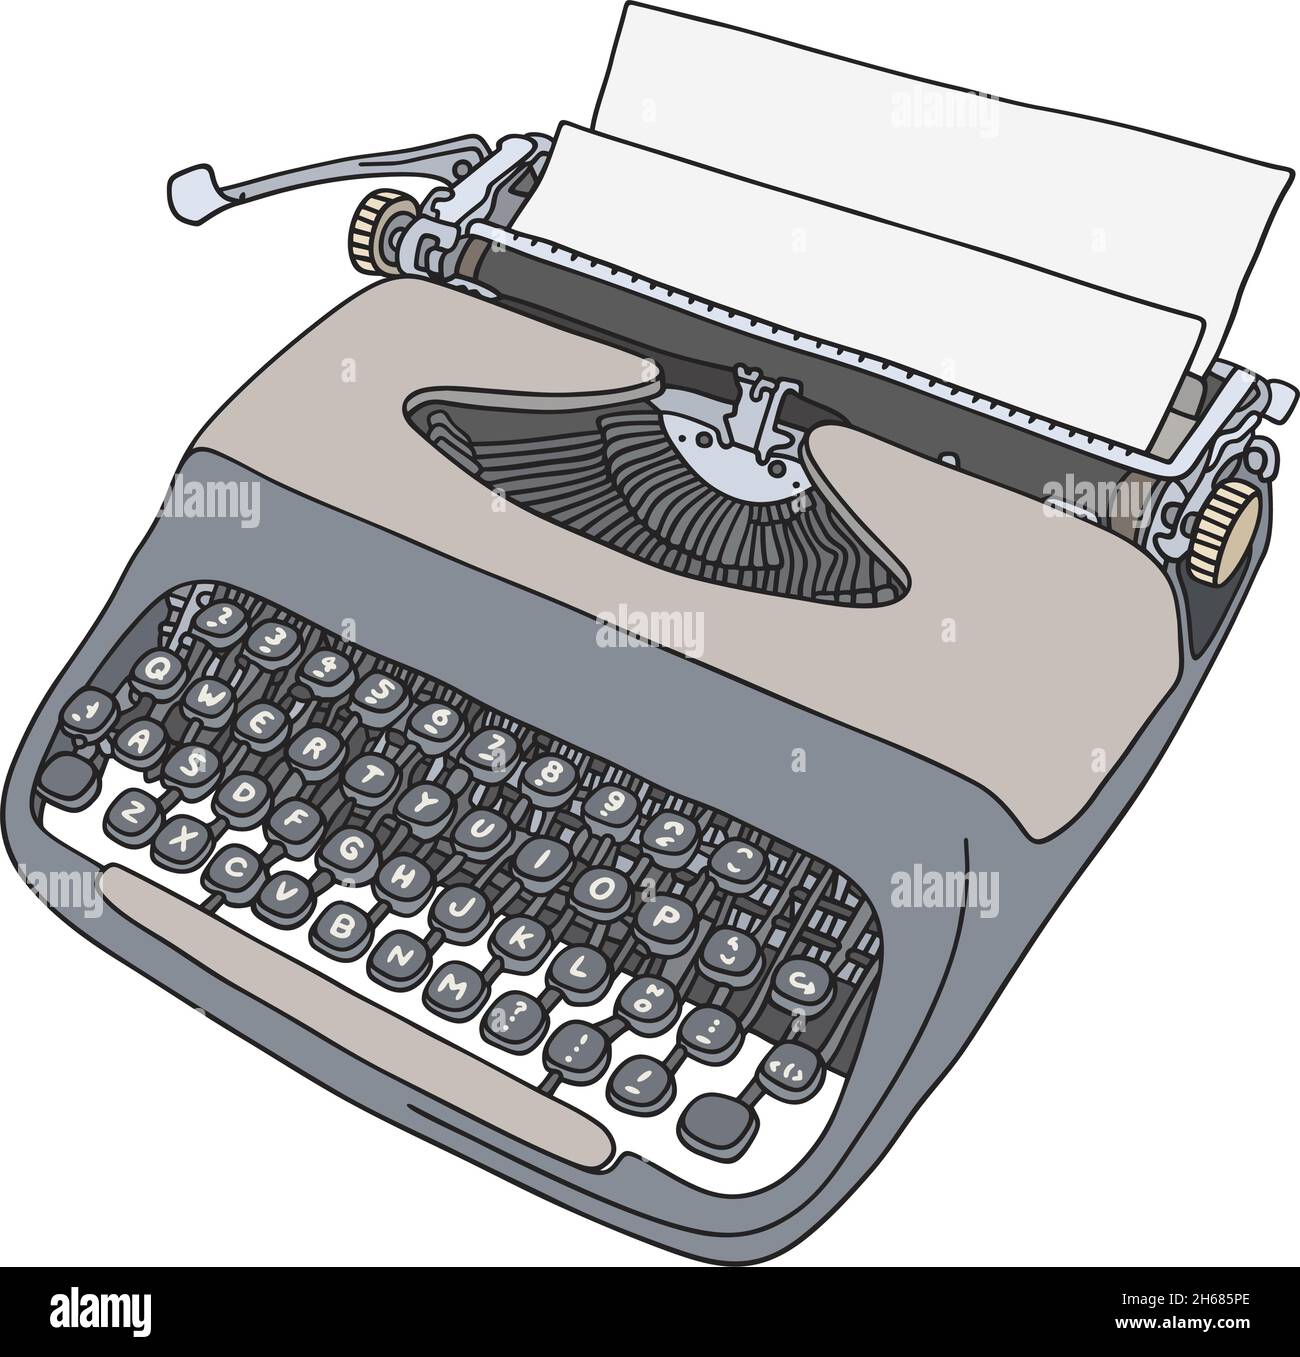 The vectorized hand drawing of a retro sutcase typewriter Stock Vector